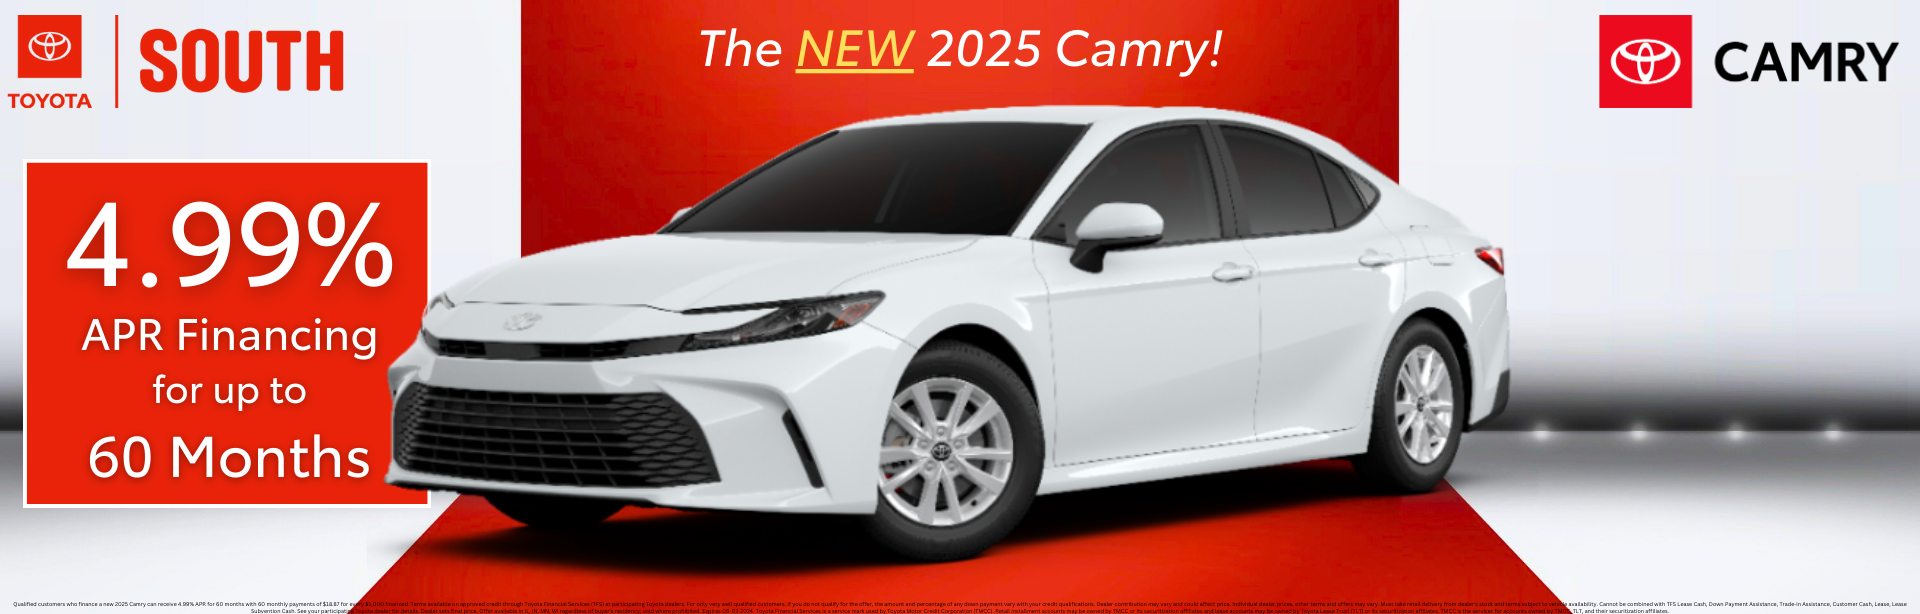 The NEW Camry at Toyota South in Richmond, KY